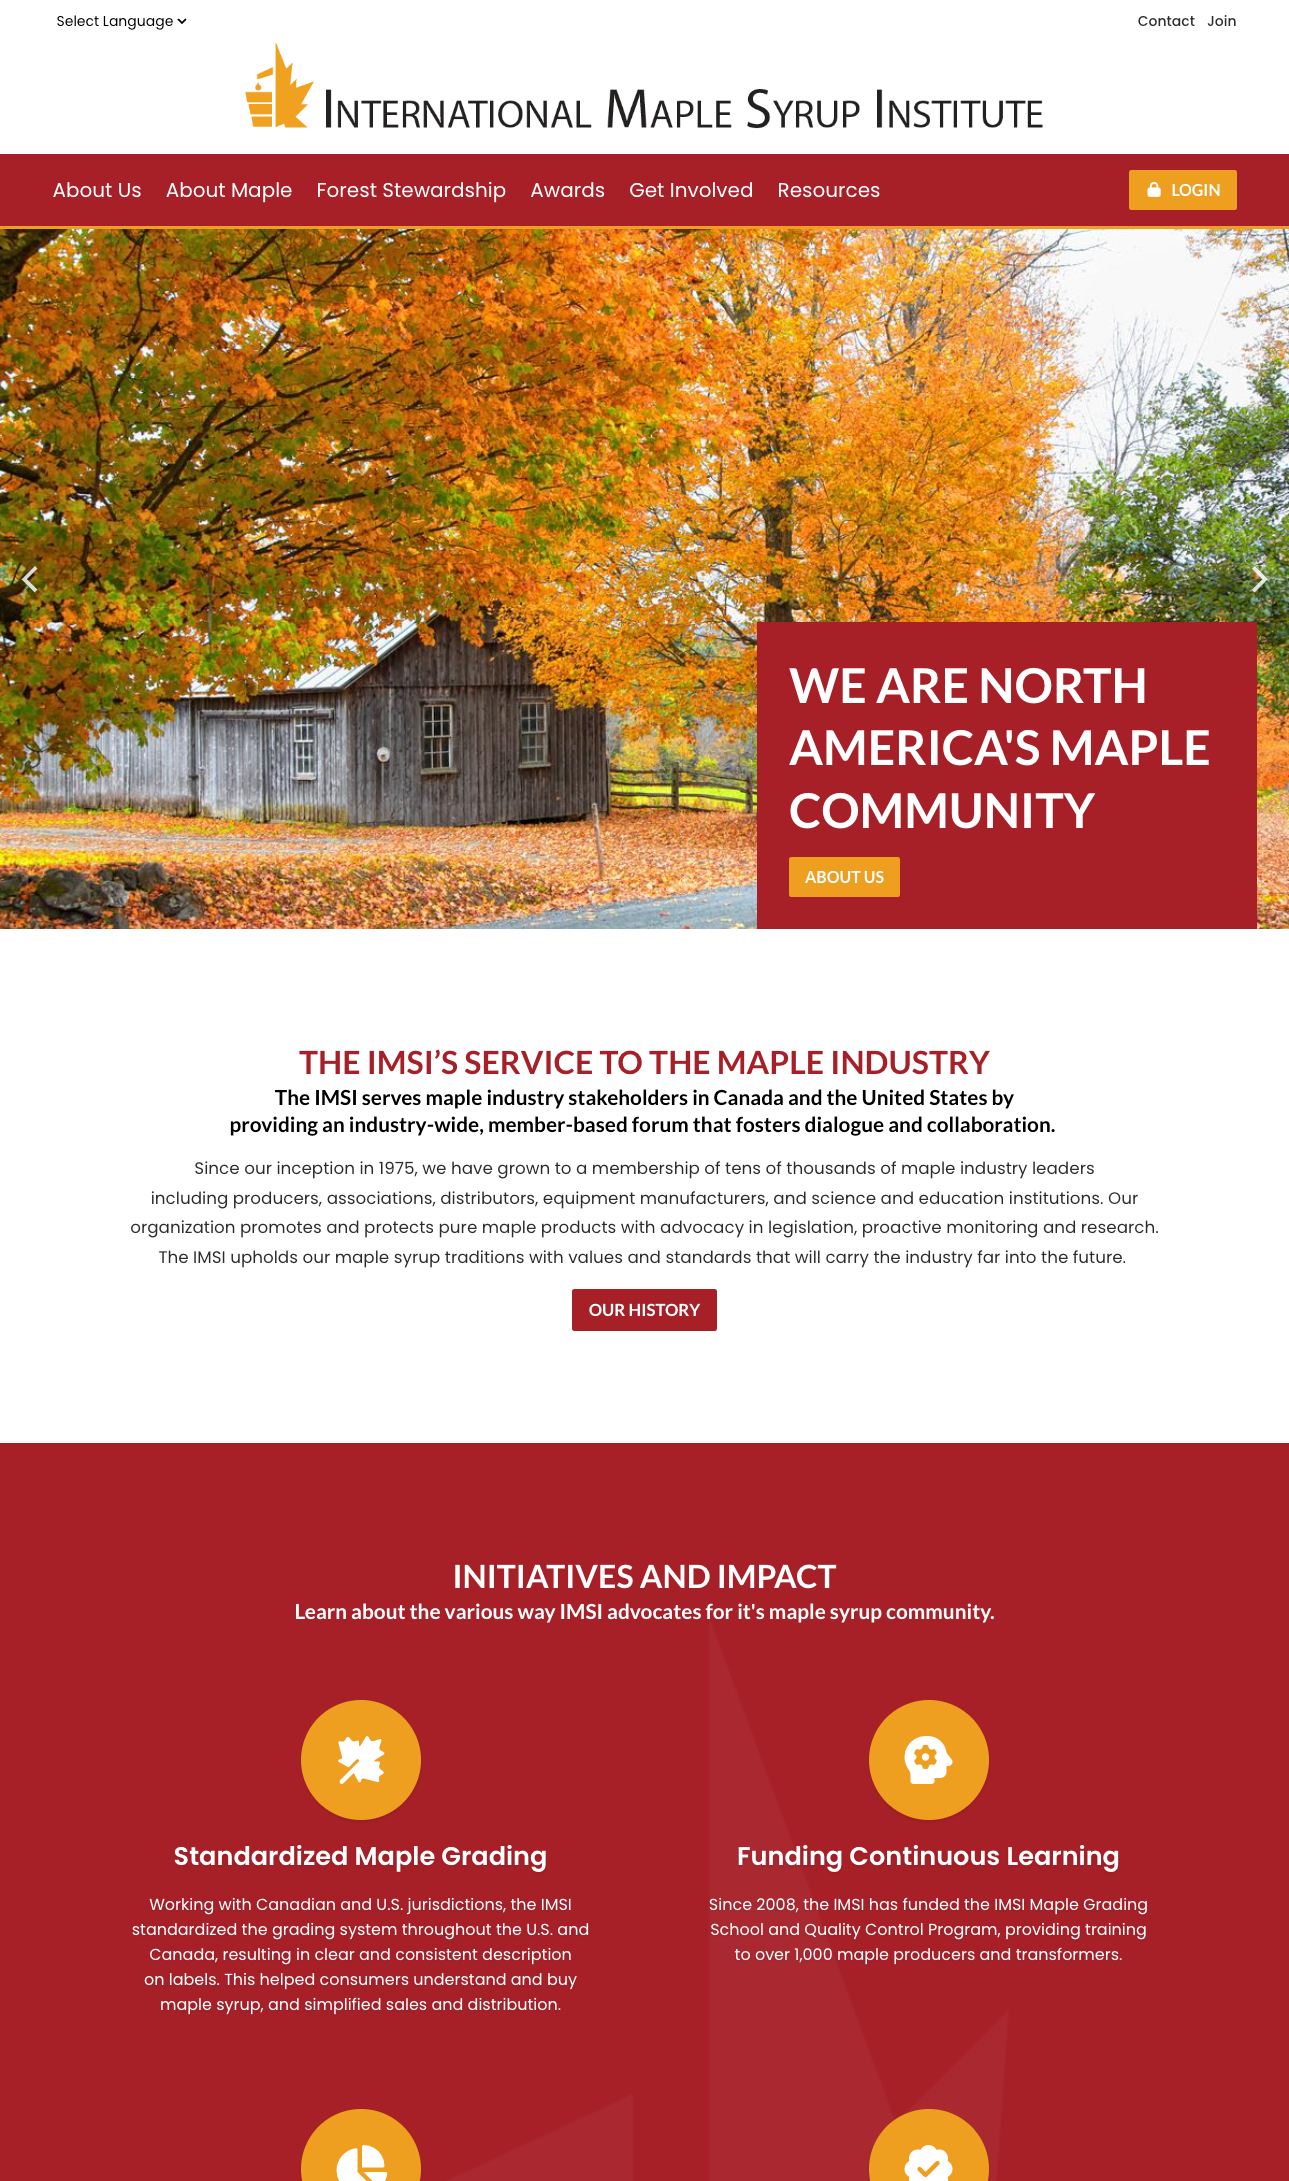 International Maple Syrup Institute Homepage